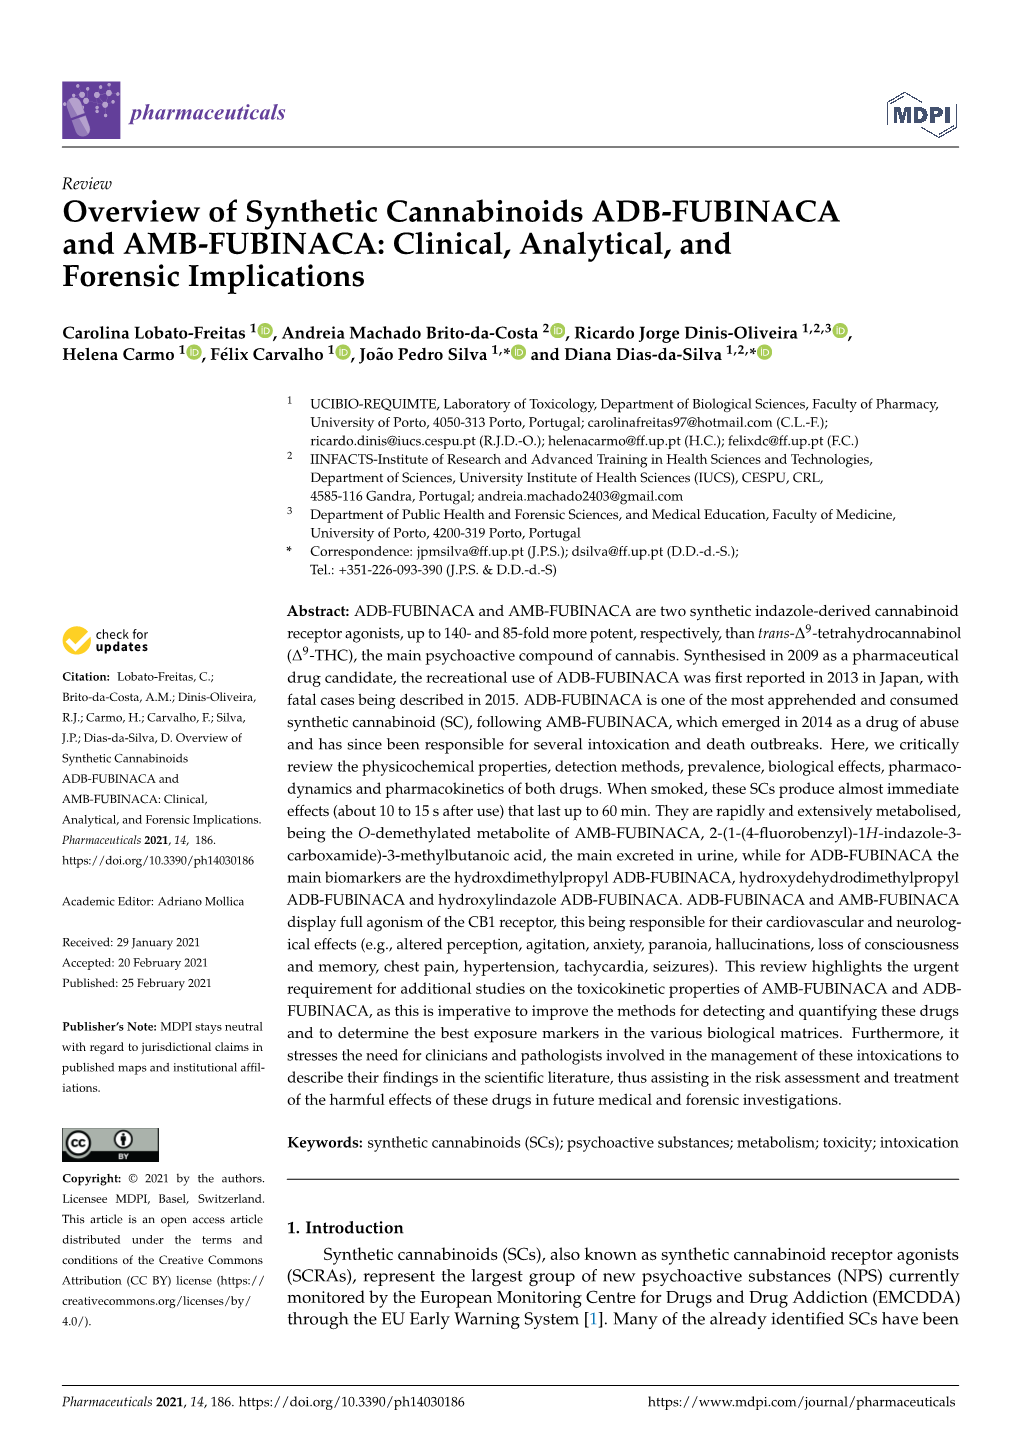 Overview of Synthetic Cannabinoids ADB-FUBINACA and AMB-FUBINACA: Clinical, Analytical, and Forensic Implications